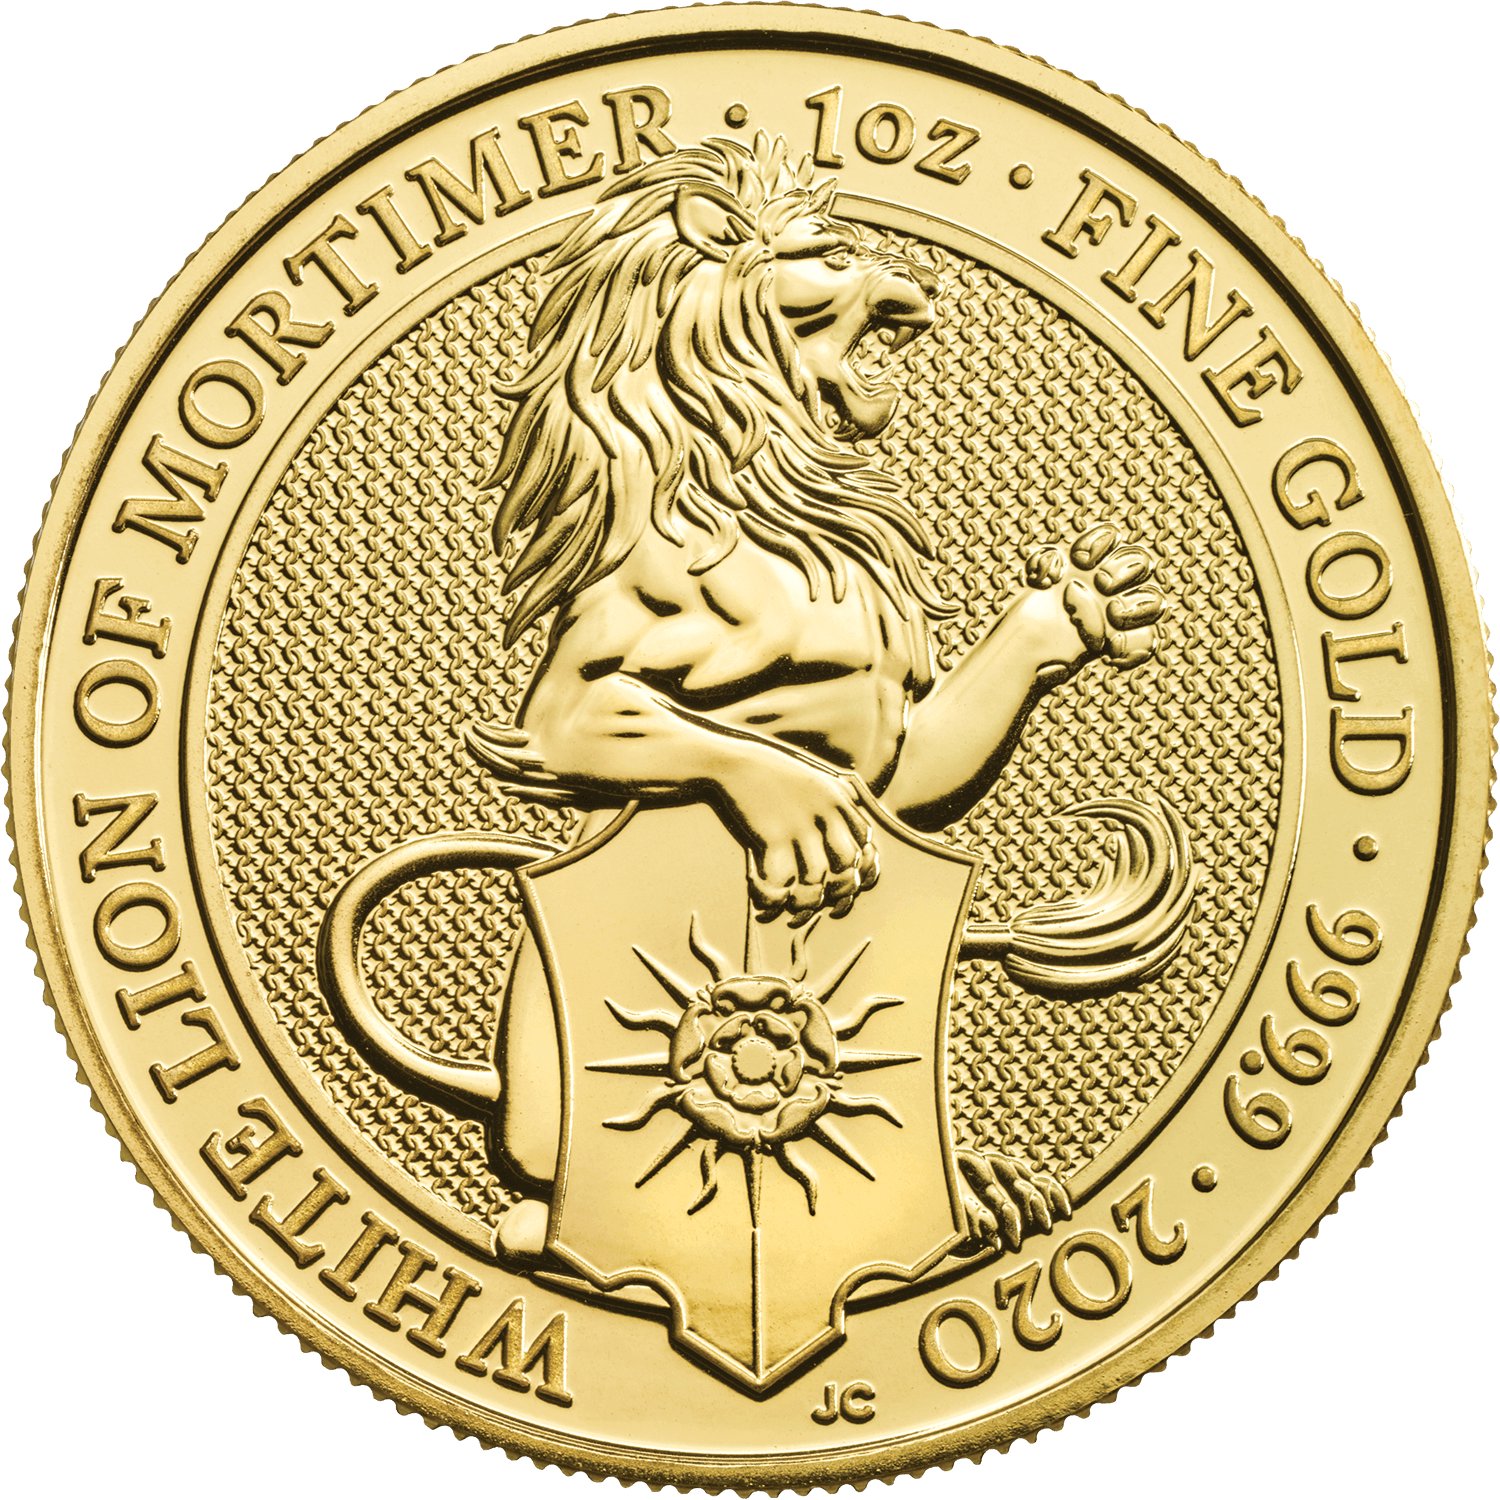 The Queen’s Beasts Gold Bullion Coins